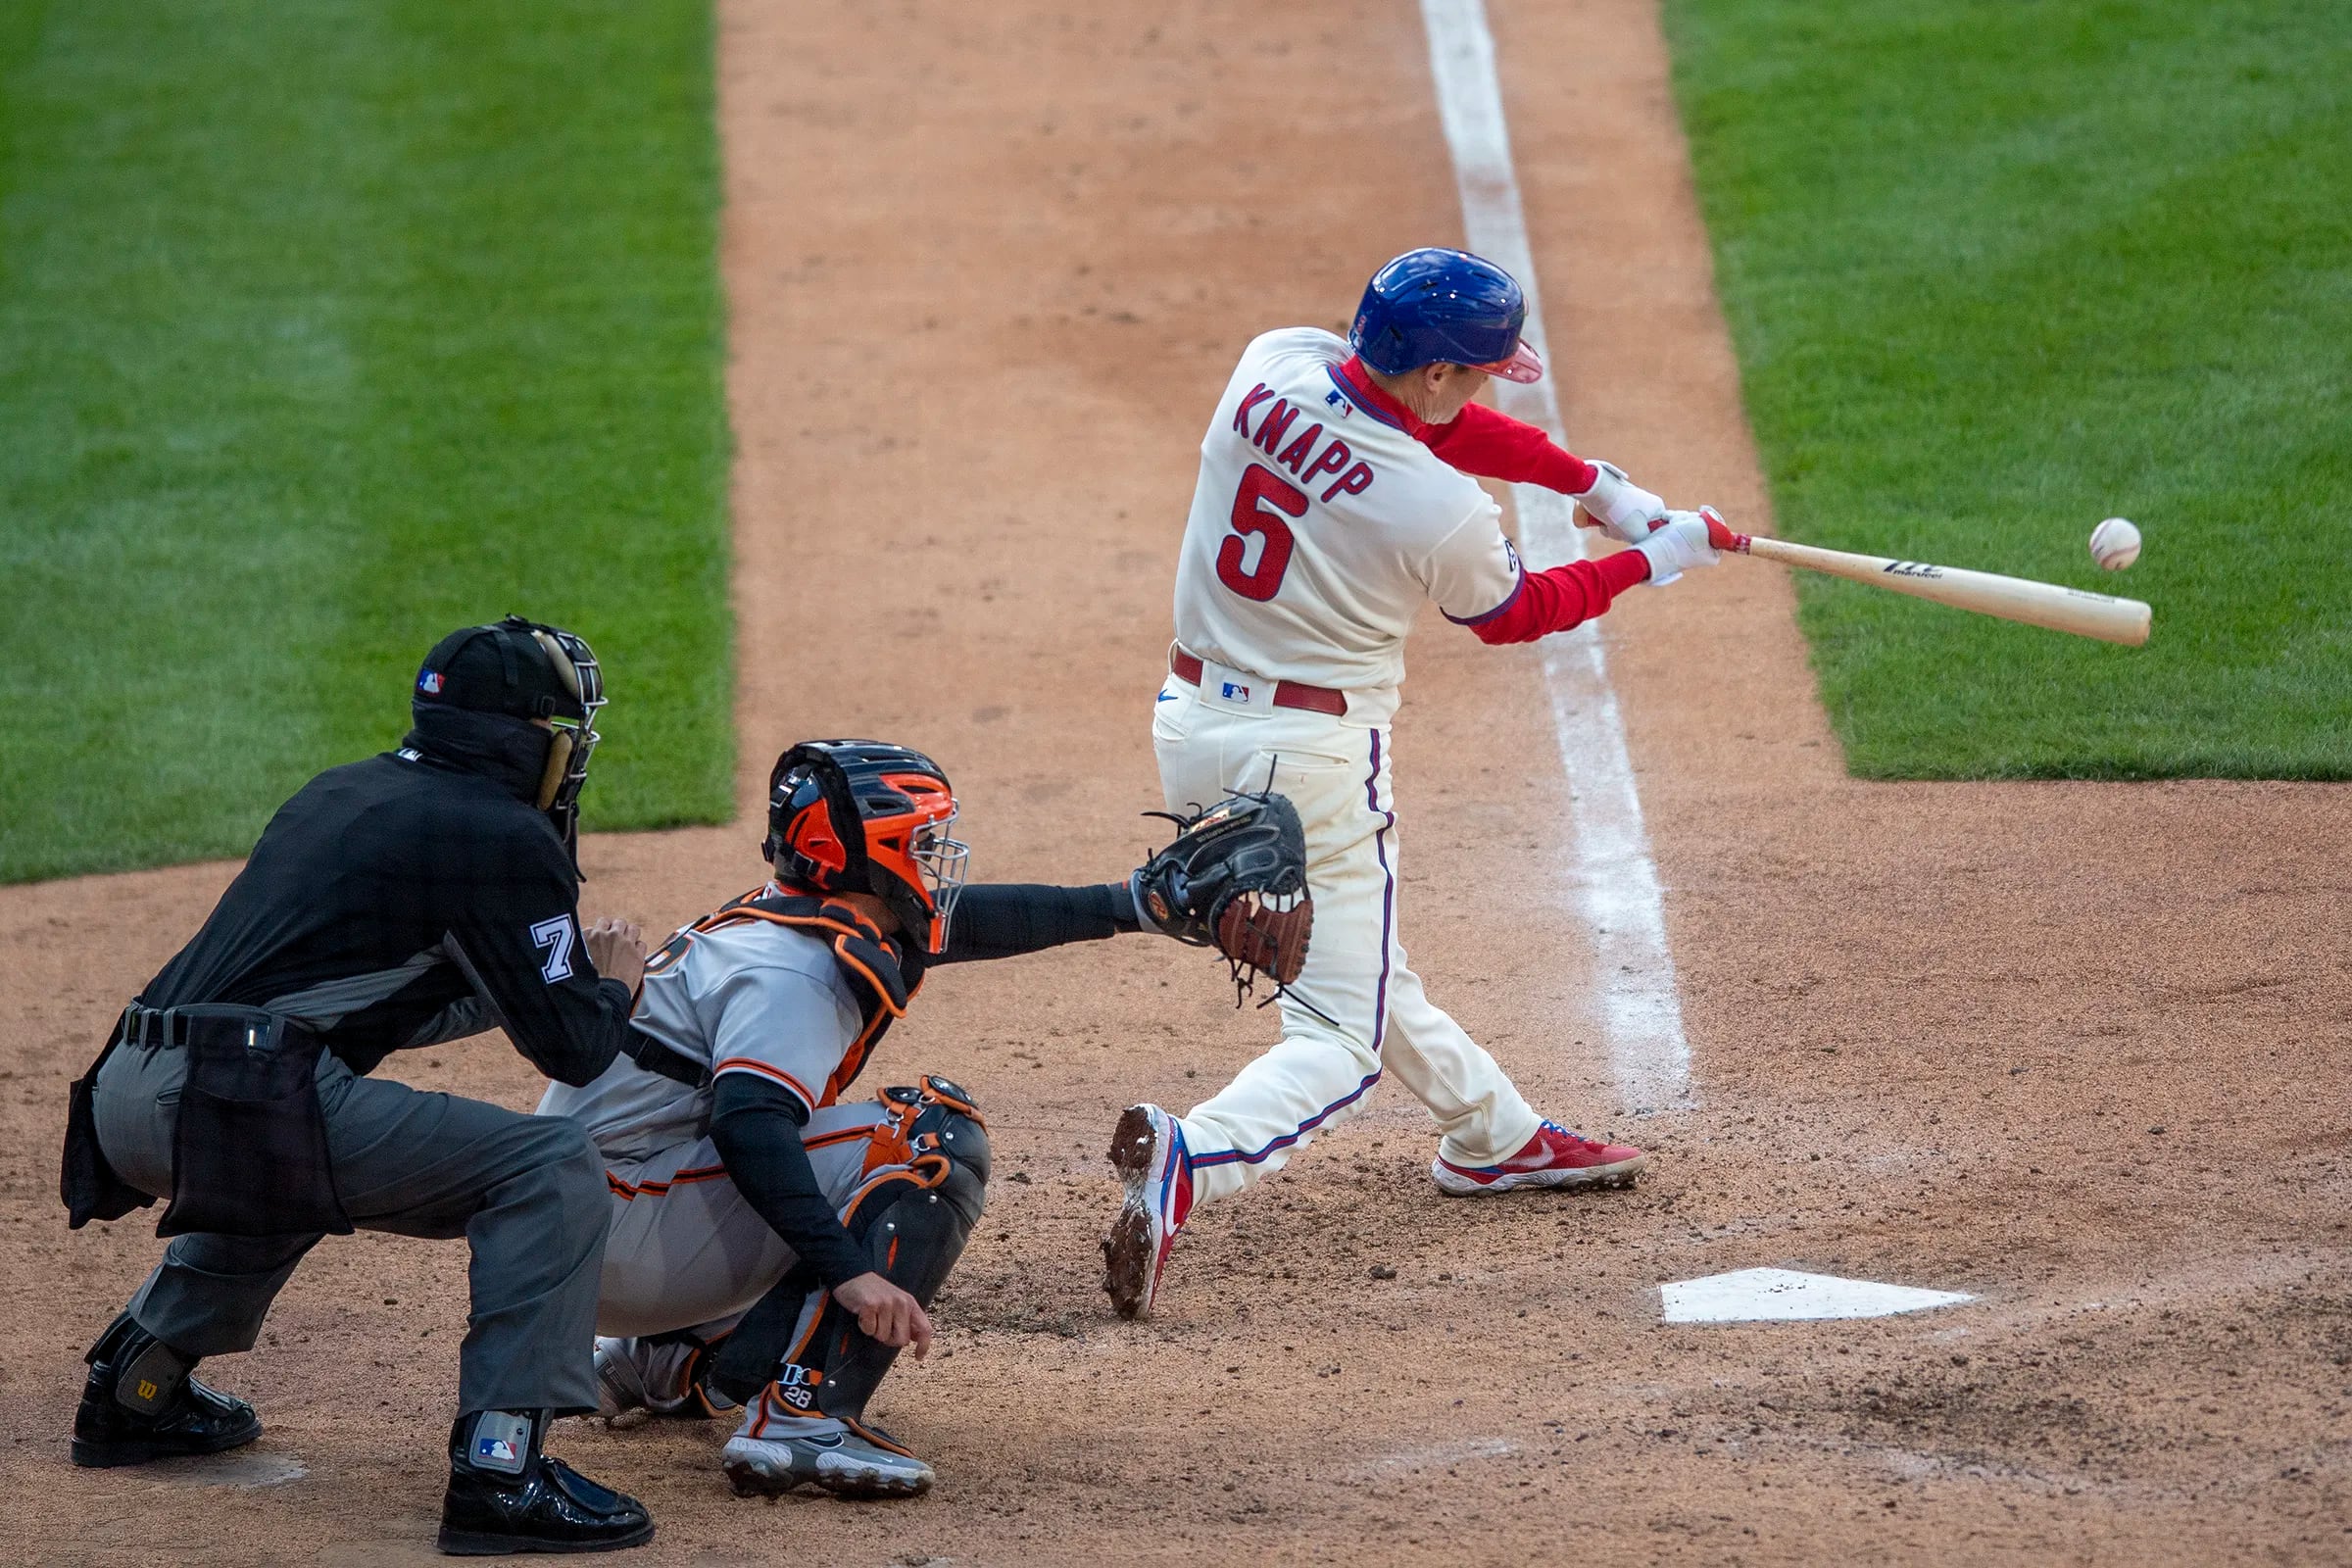 Ibanez leads Phillies to 6-5 win over Mets - The San Diego Union